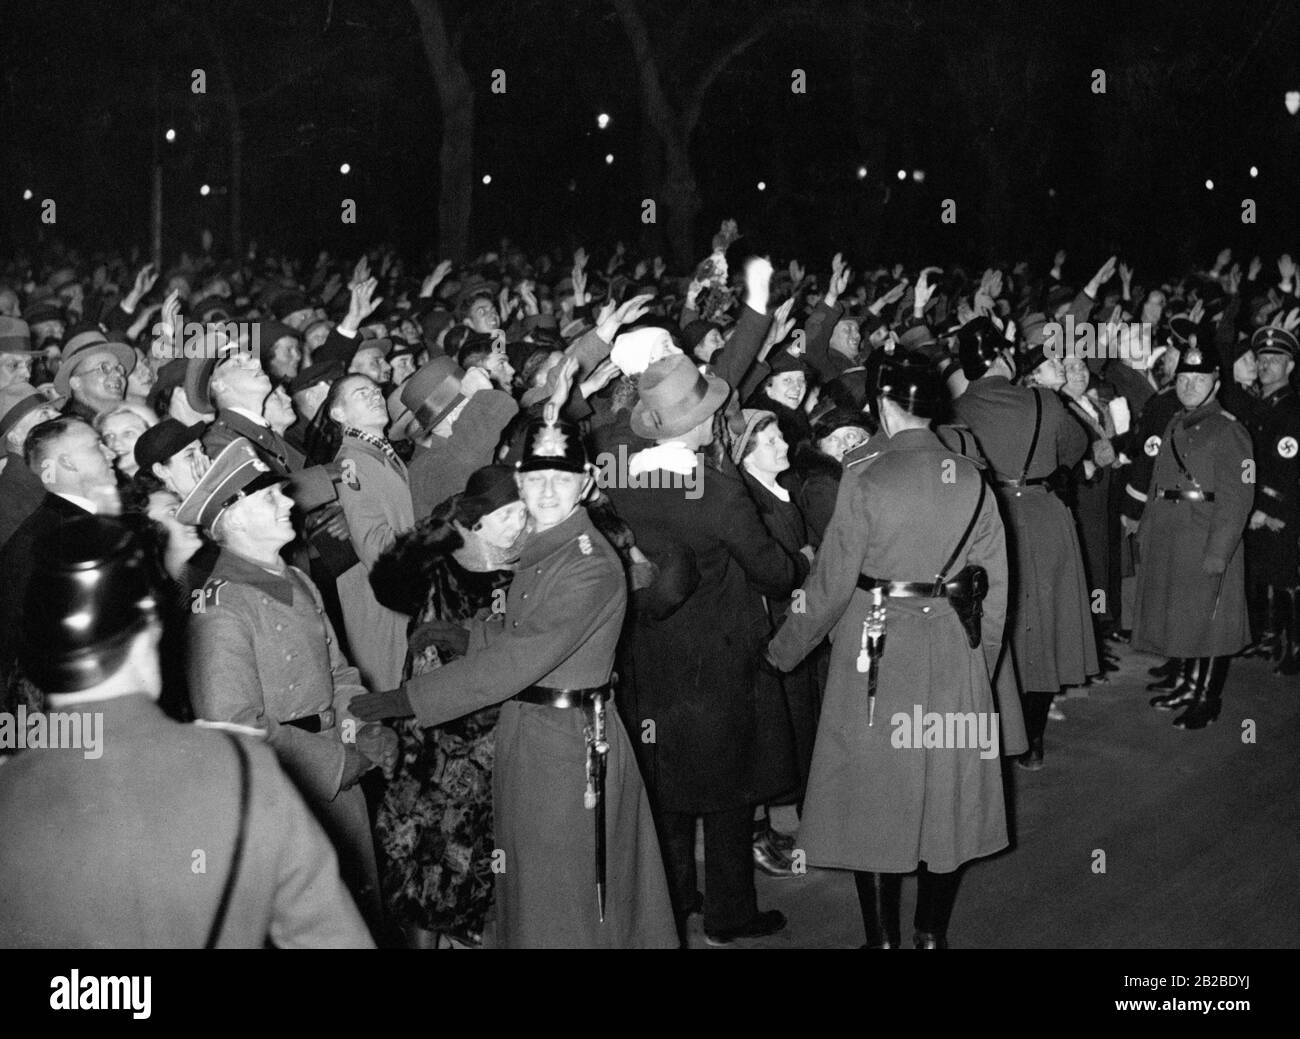 Supporters greet Adolf Hitler at midnight on New Year's Eve. Many of them perform the Nazi salute in his honor. Policemen and representatives of the Schutzstaffel SS ensure the order. Stock Photo